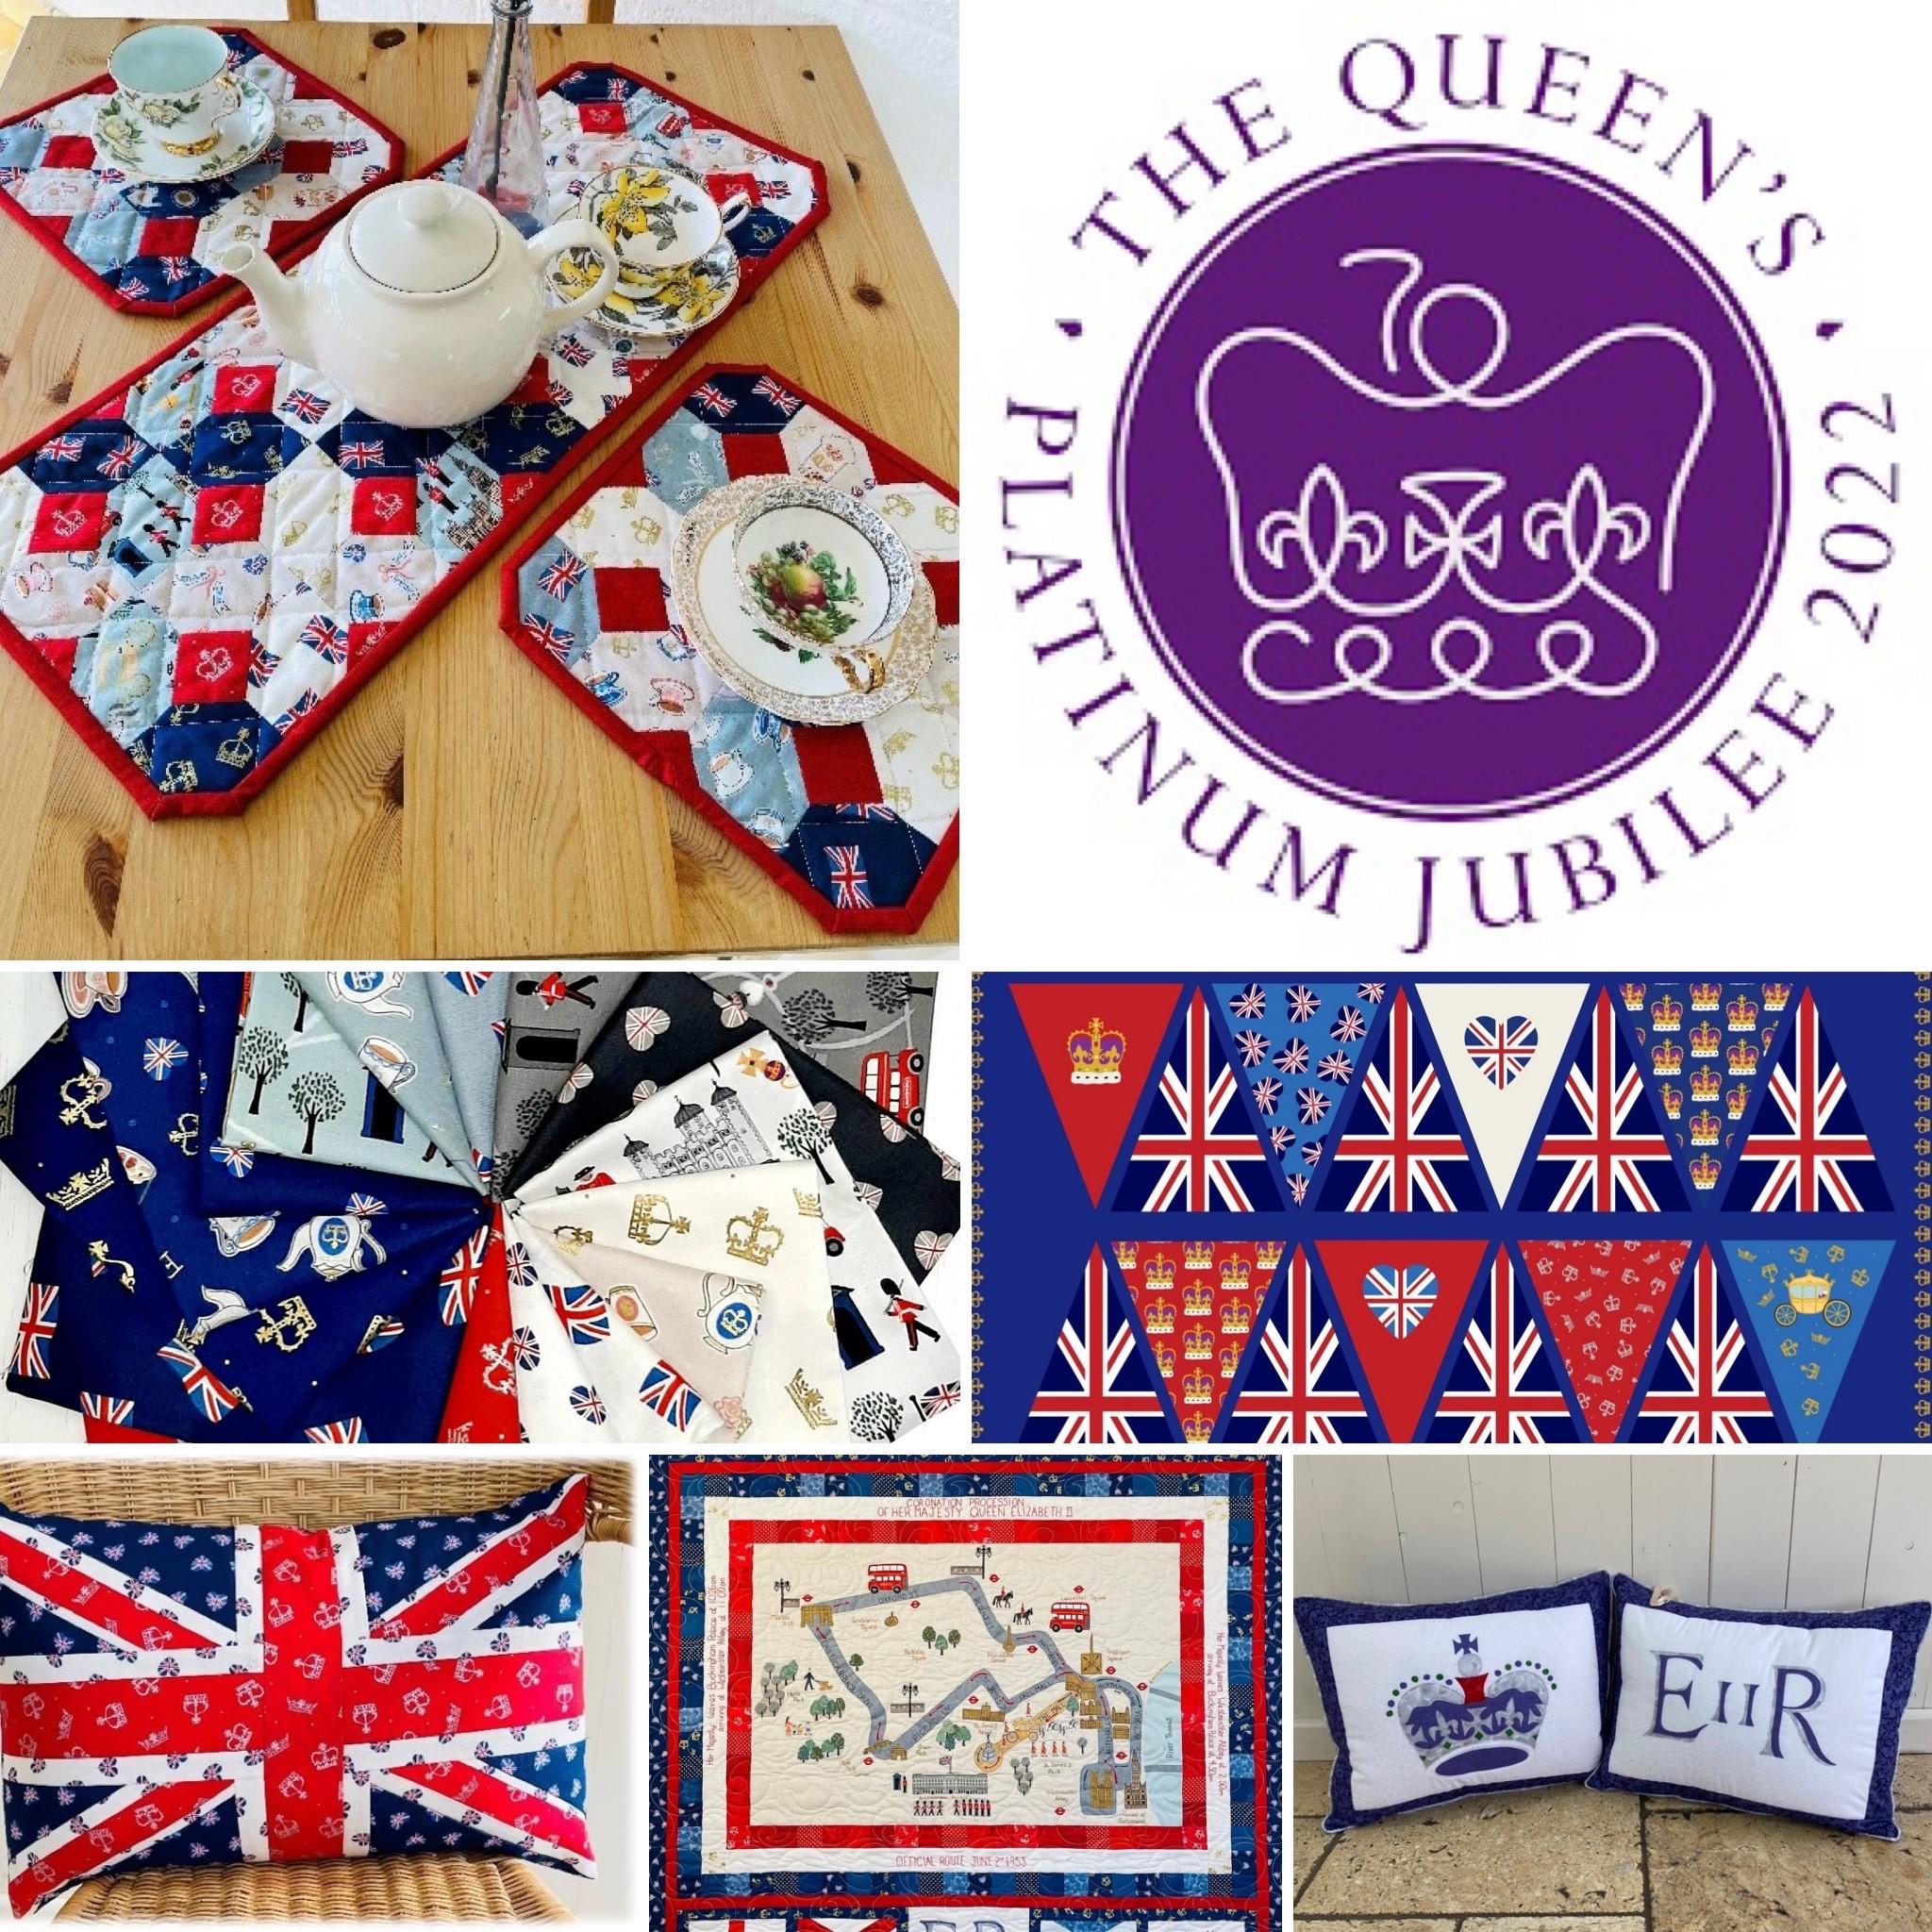 Bramble Patch Jubilee Quilt